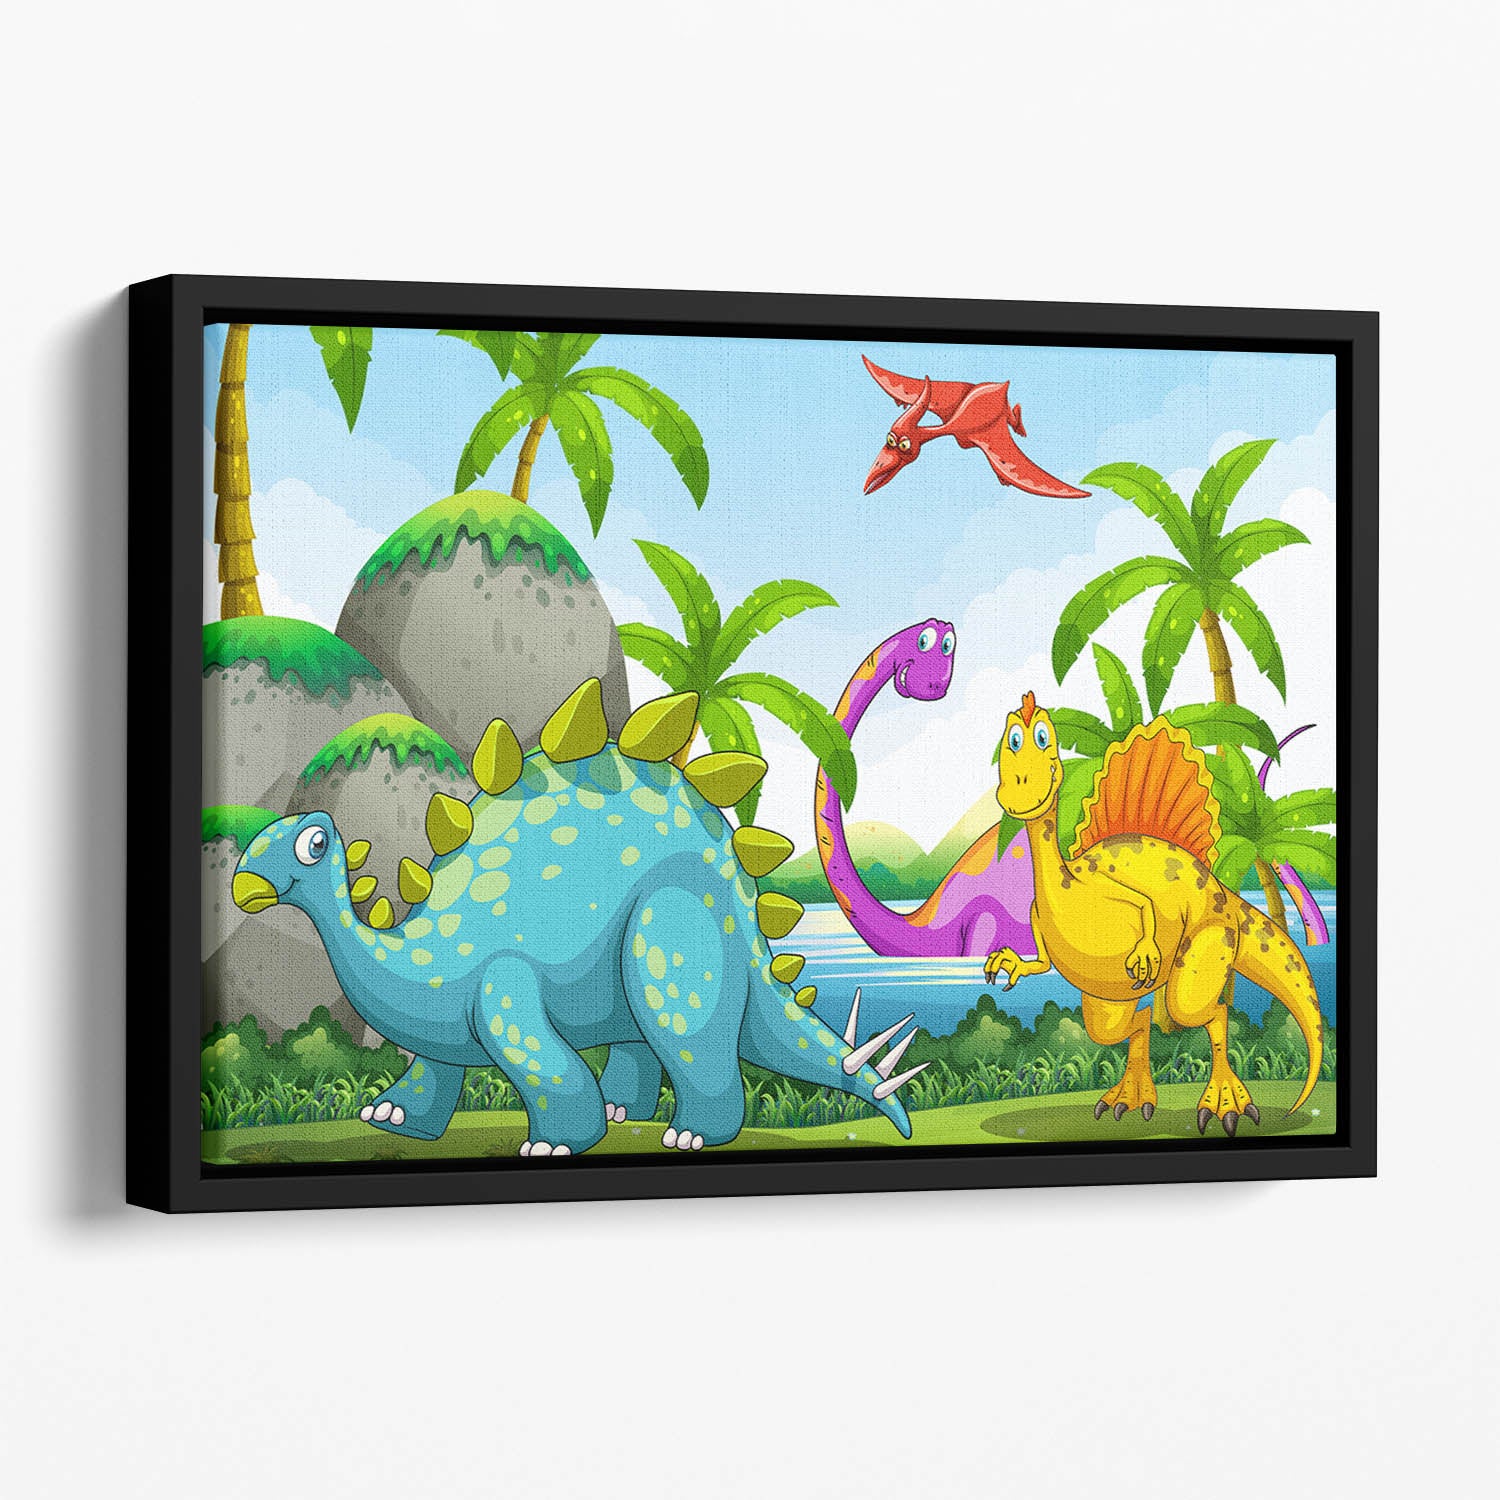 Dinosaurs living in the jungle Floating Framed Canvas